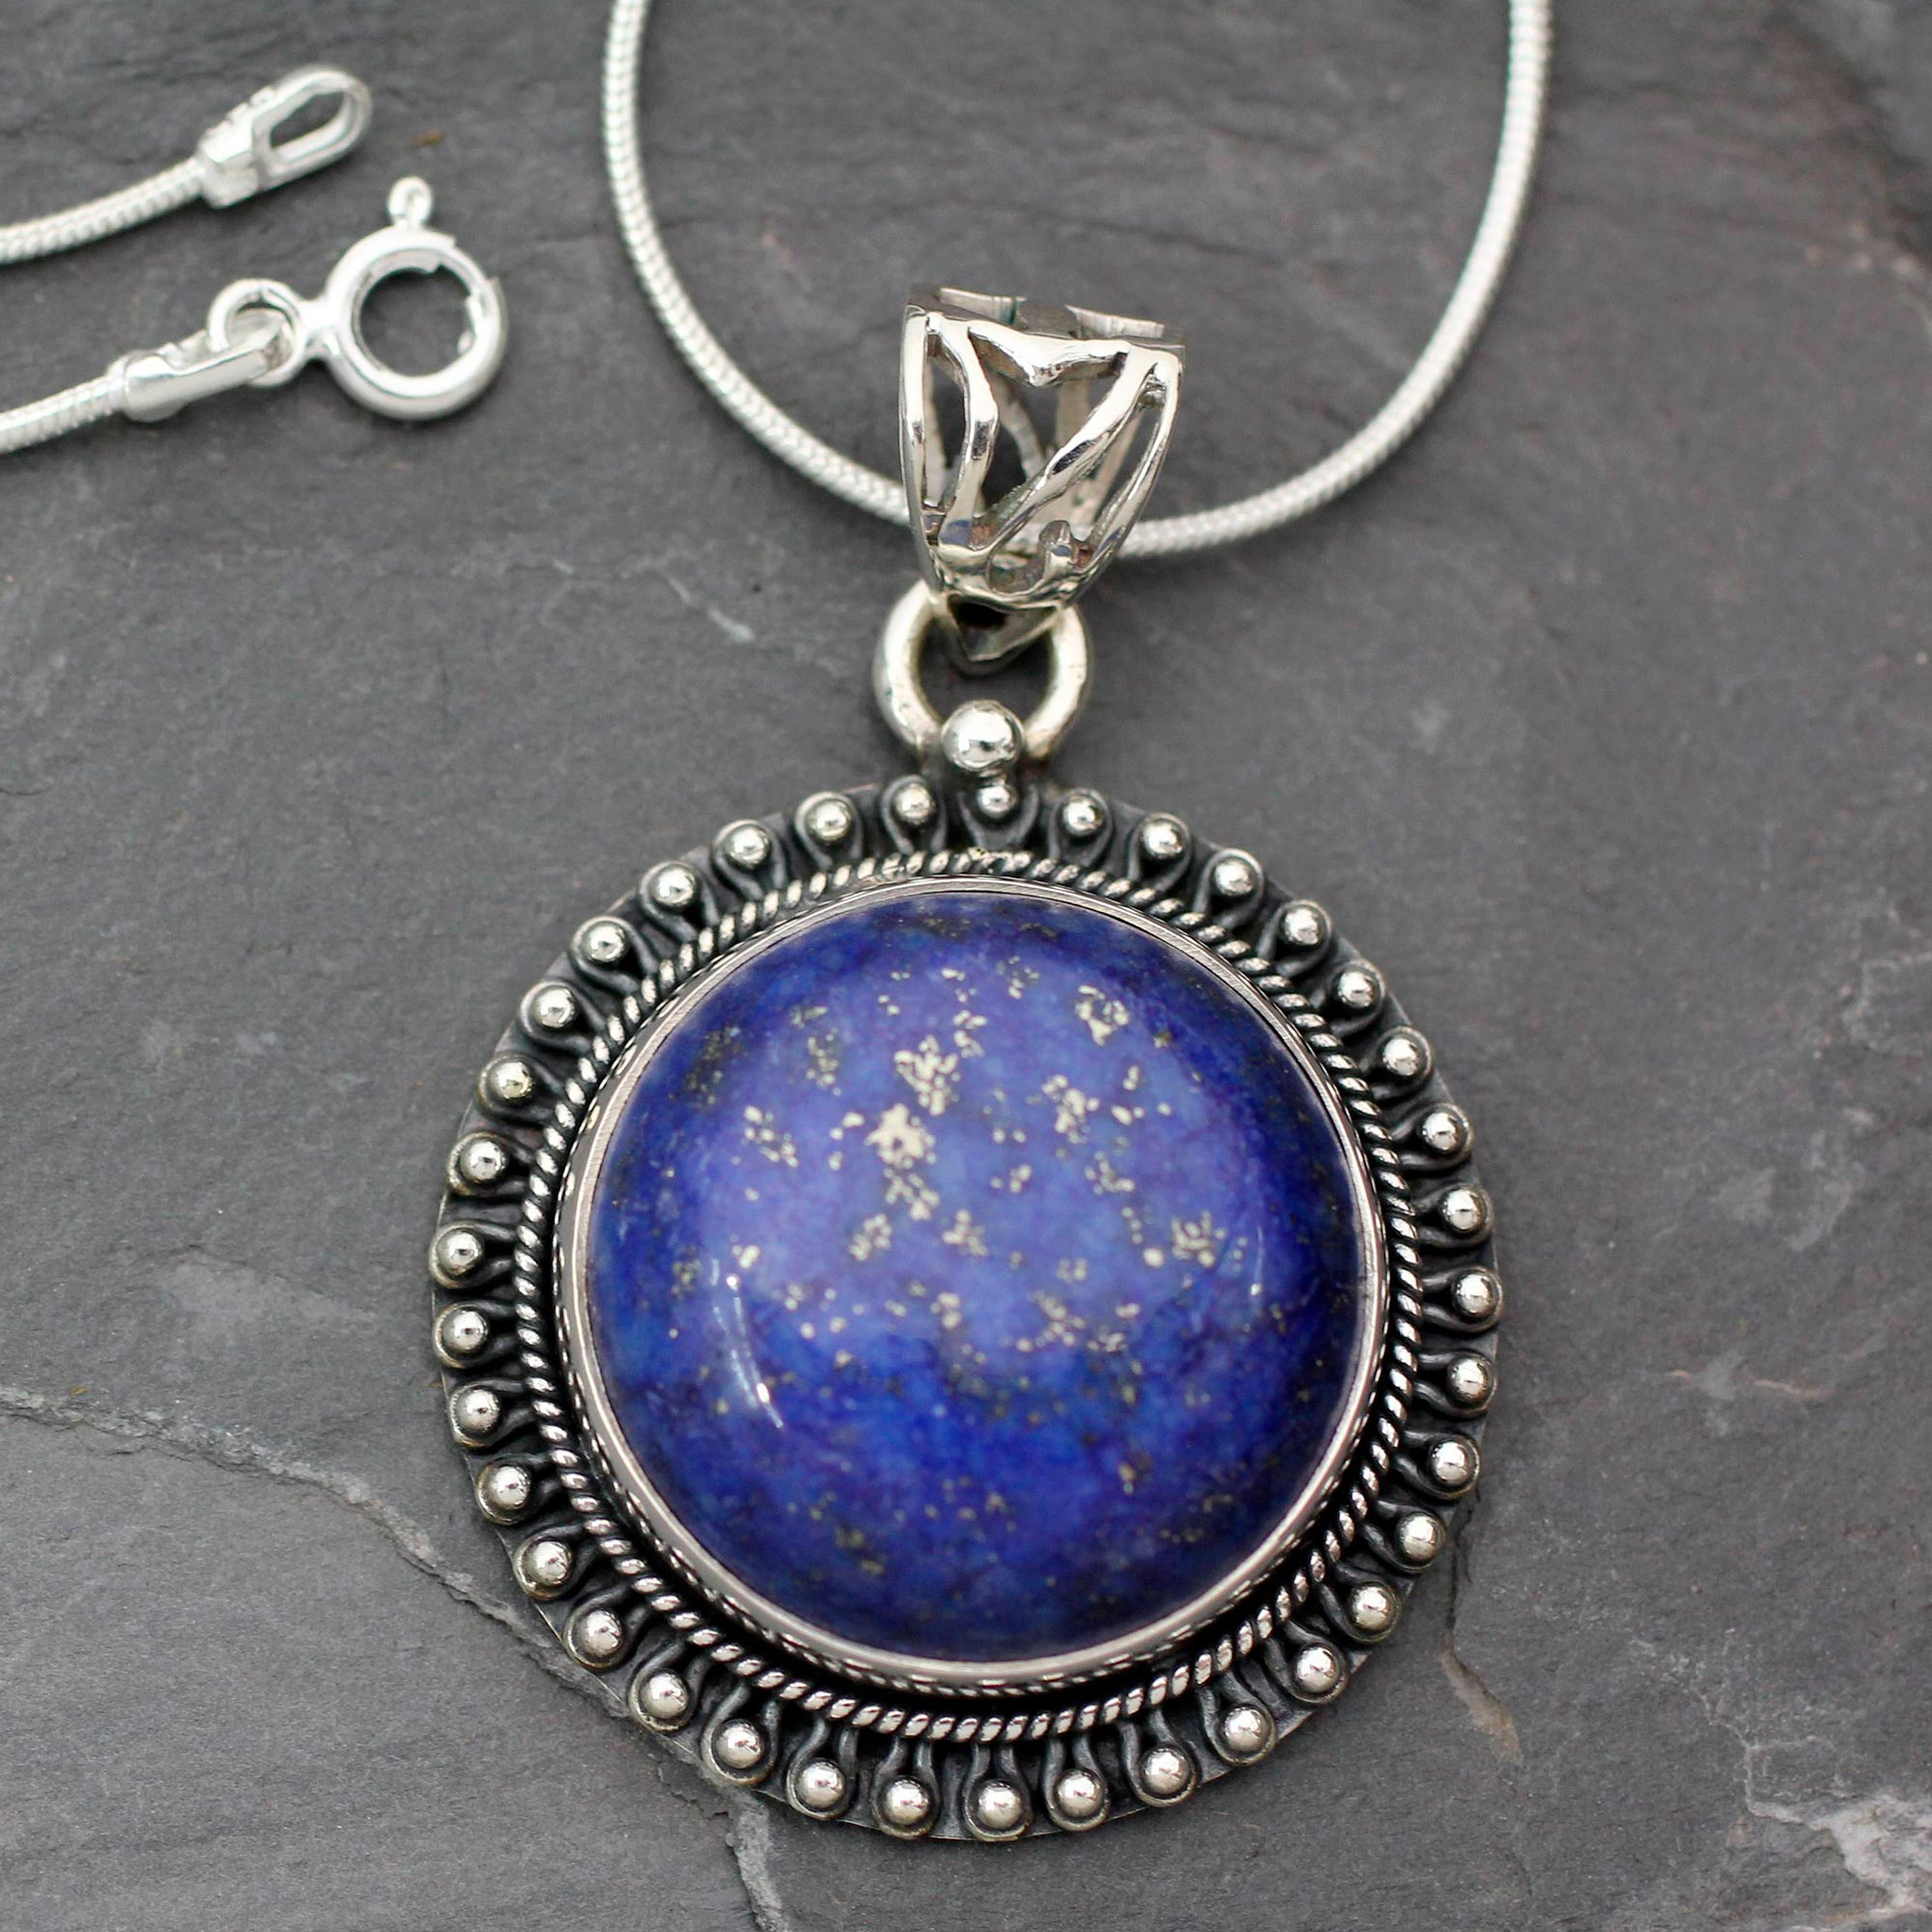 Details about   Lapis Oval with Spiral 925 Sterling Silver Pendant Corona Sun Jewelry 